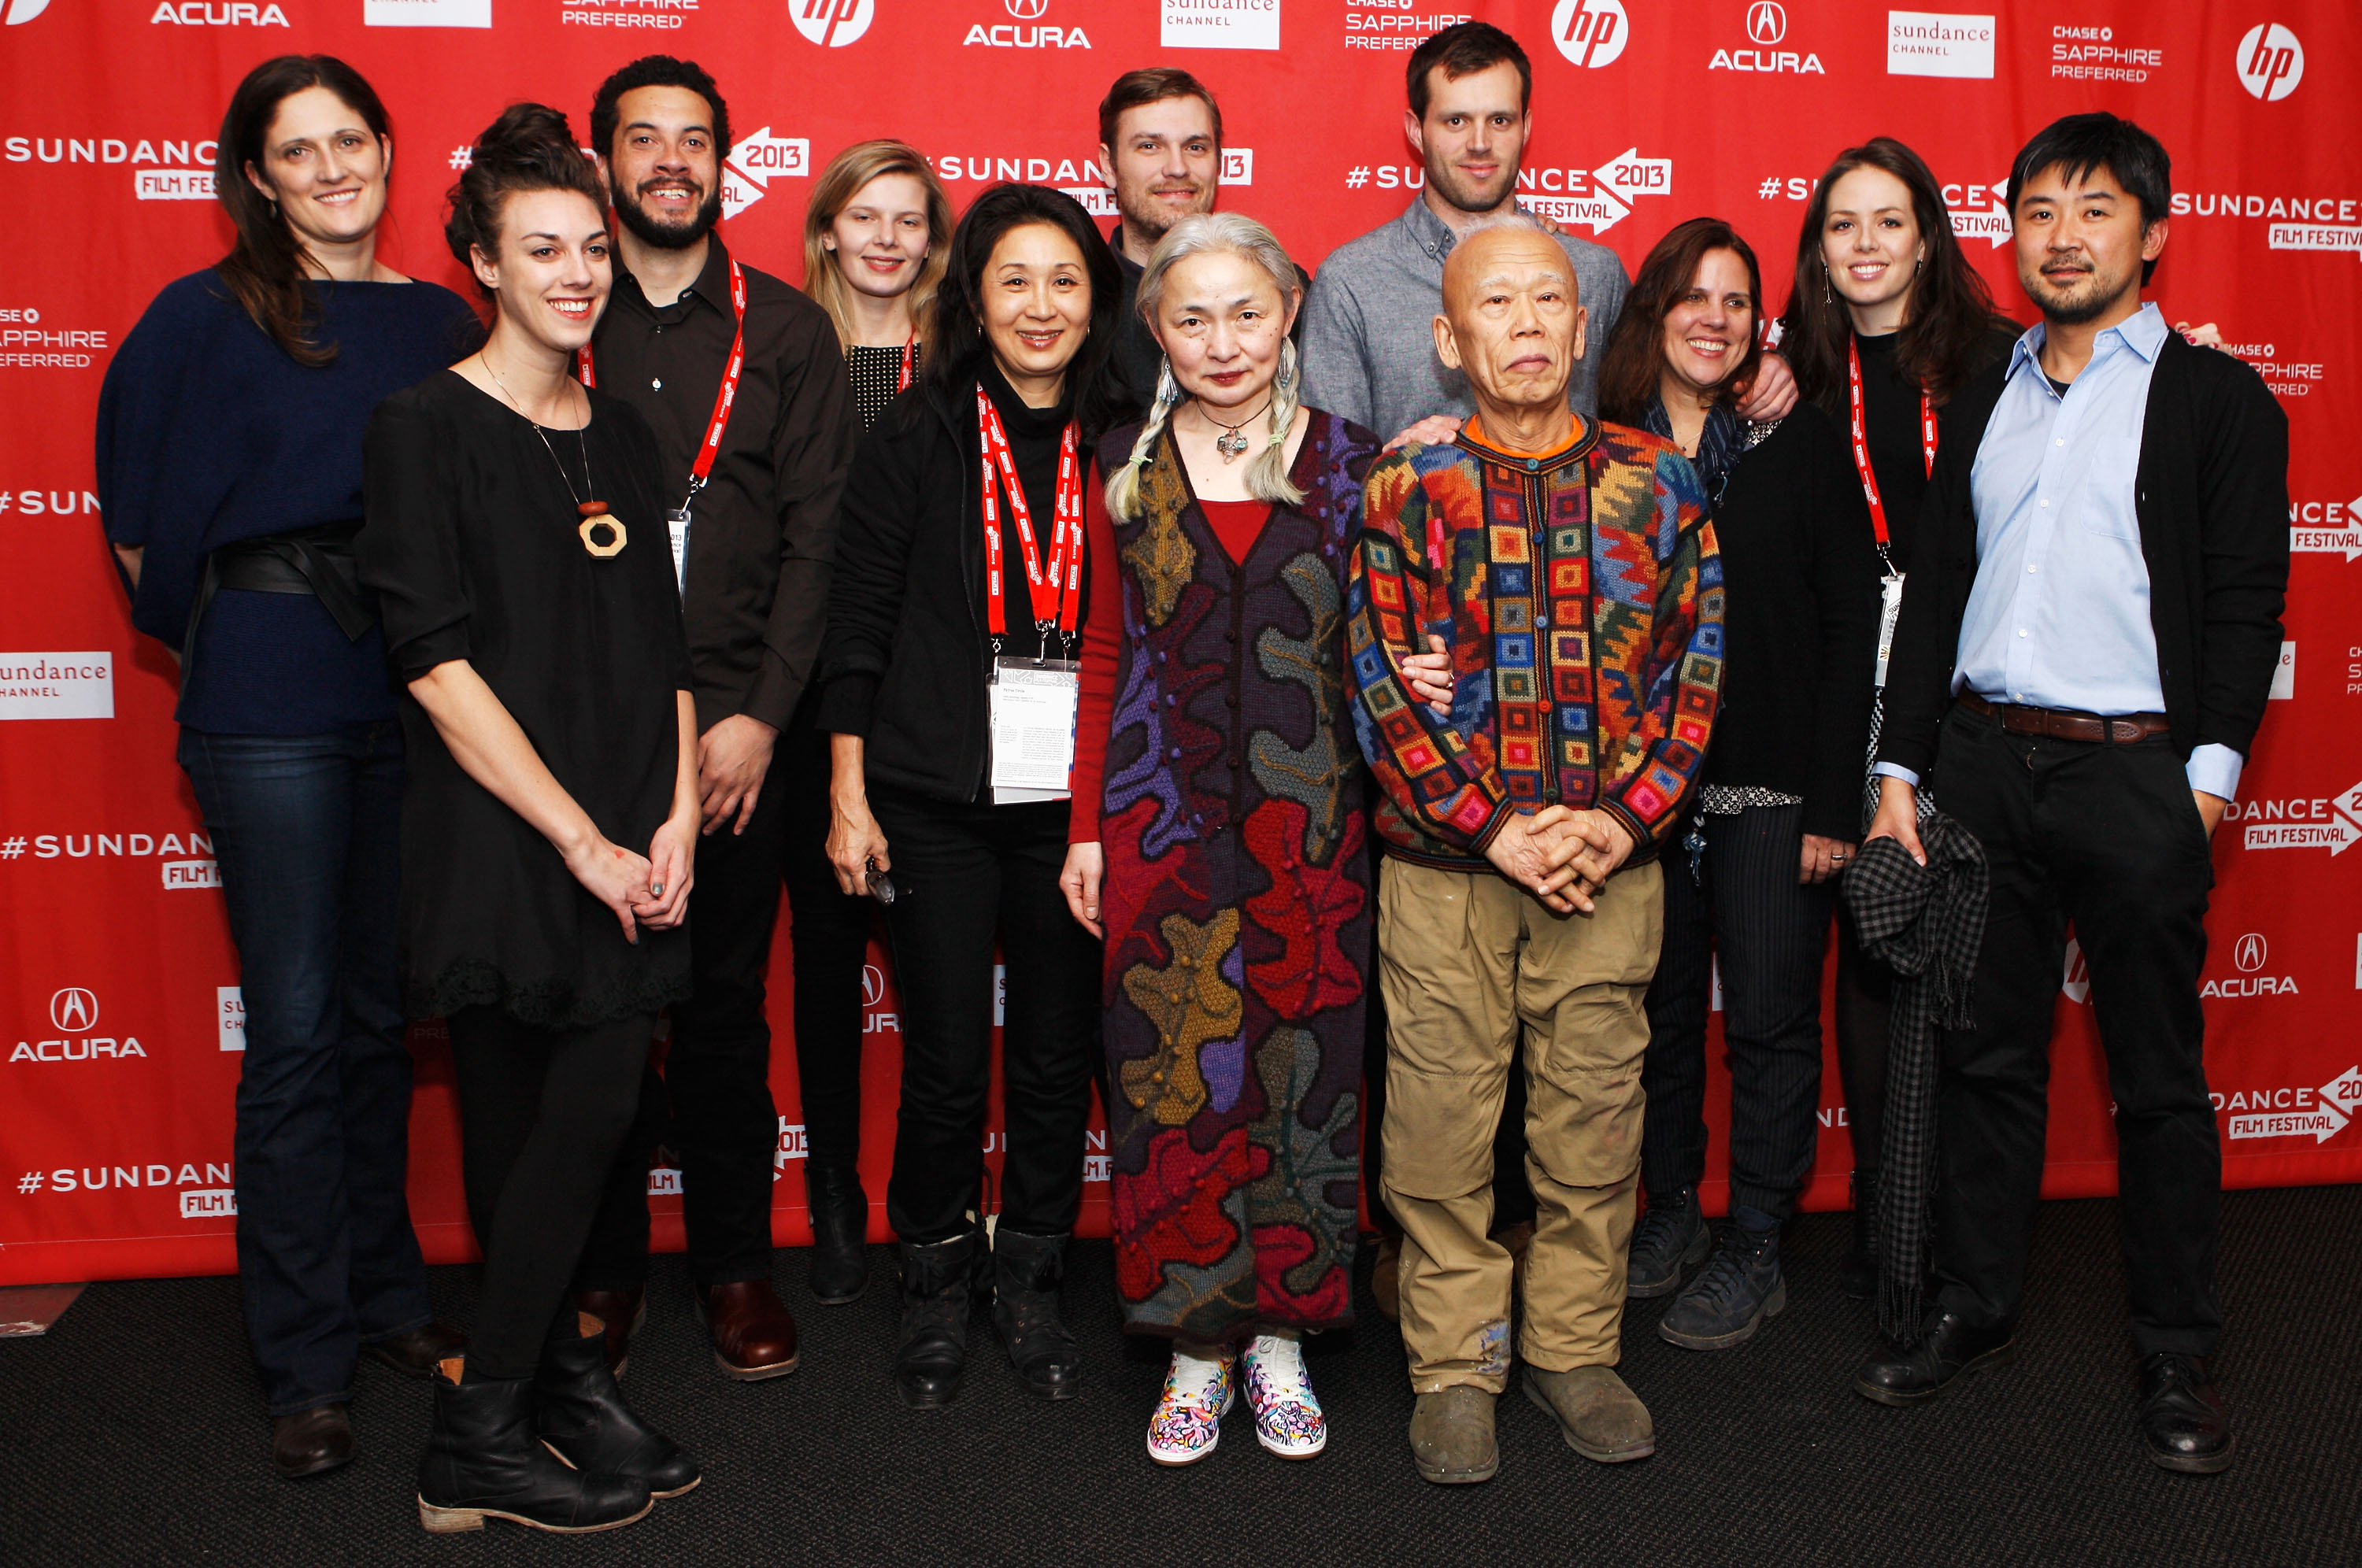 Crew at Sundance 2013 - World Premiere of Cutie and the Boxer